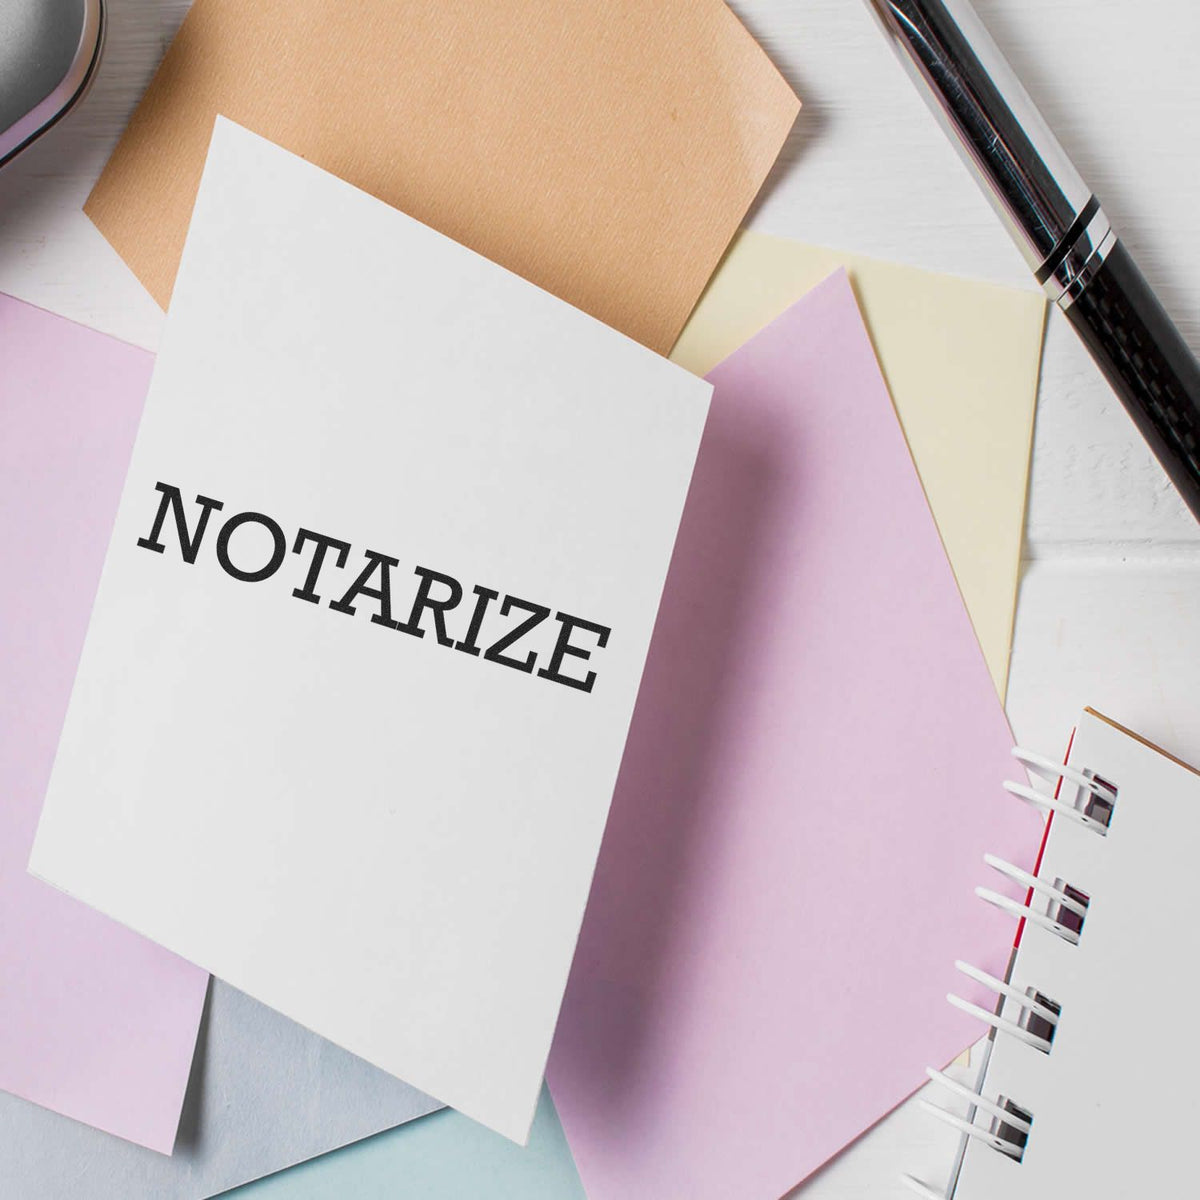 Notarize Rubber Stamp Lifestyle Photo